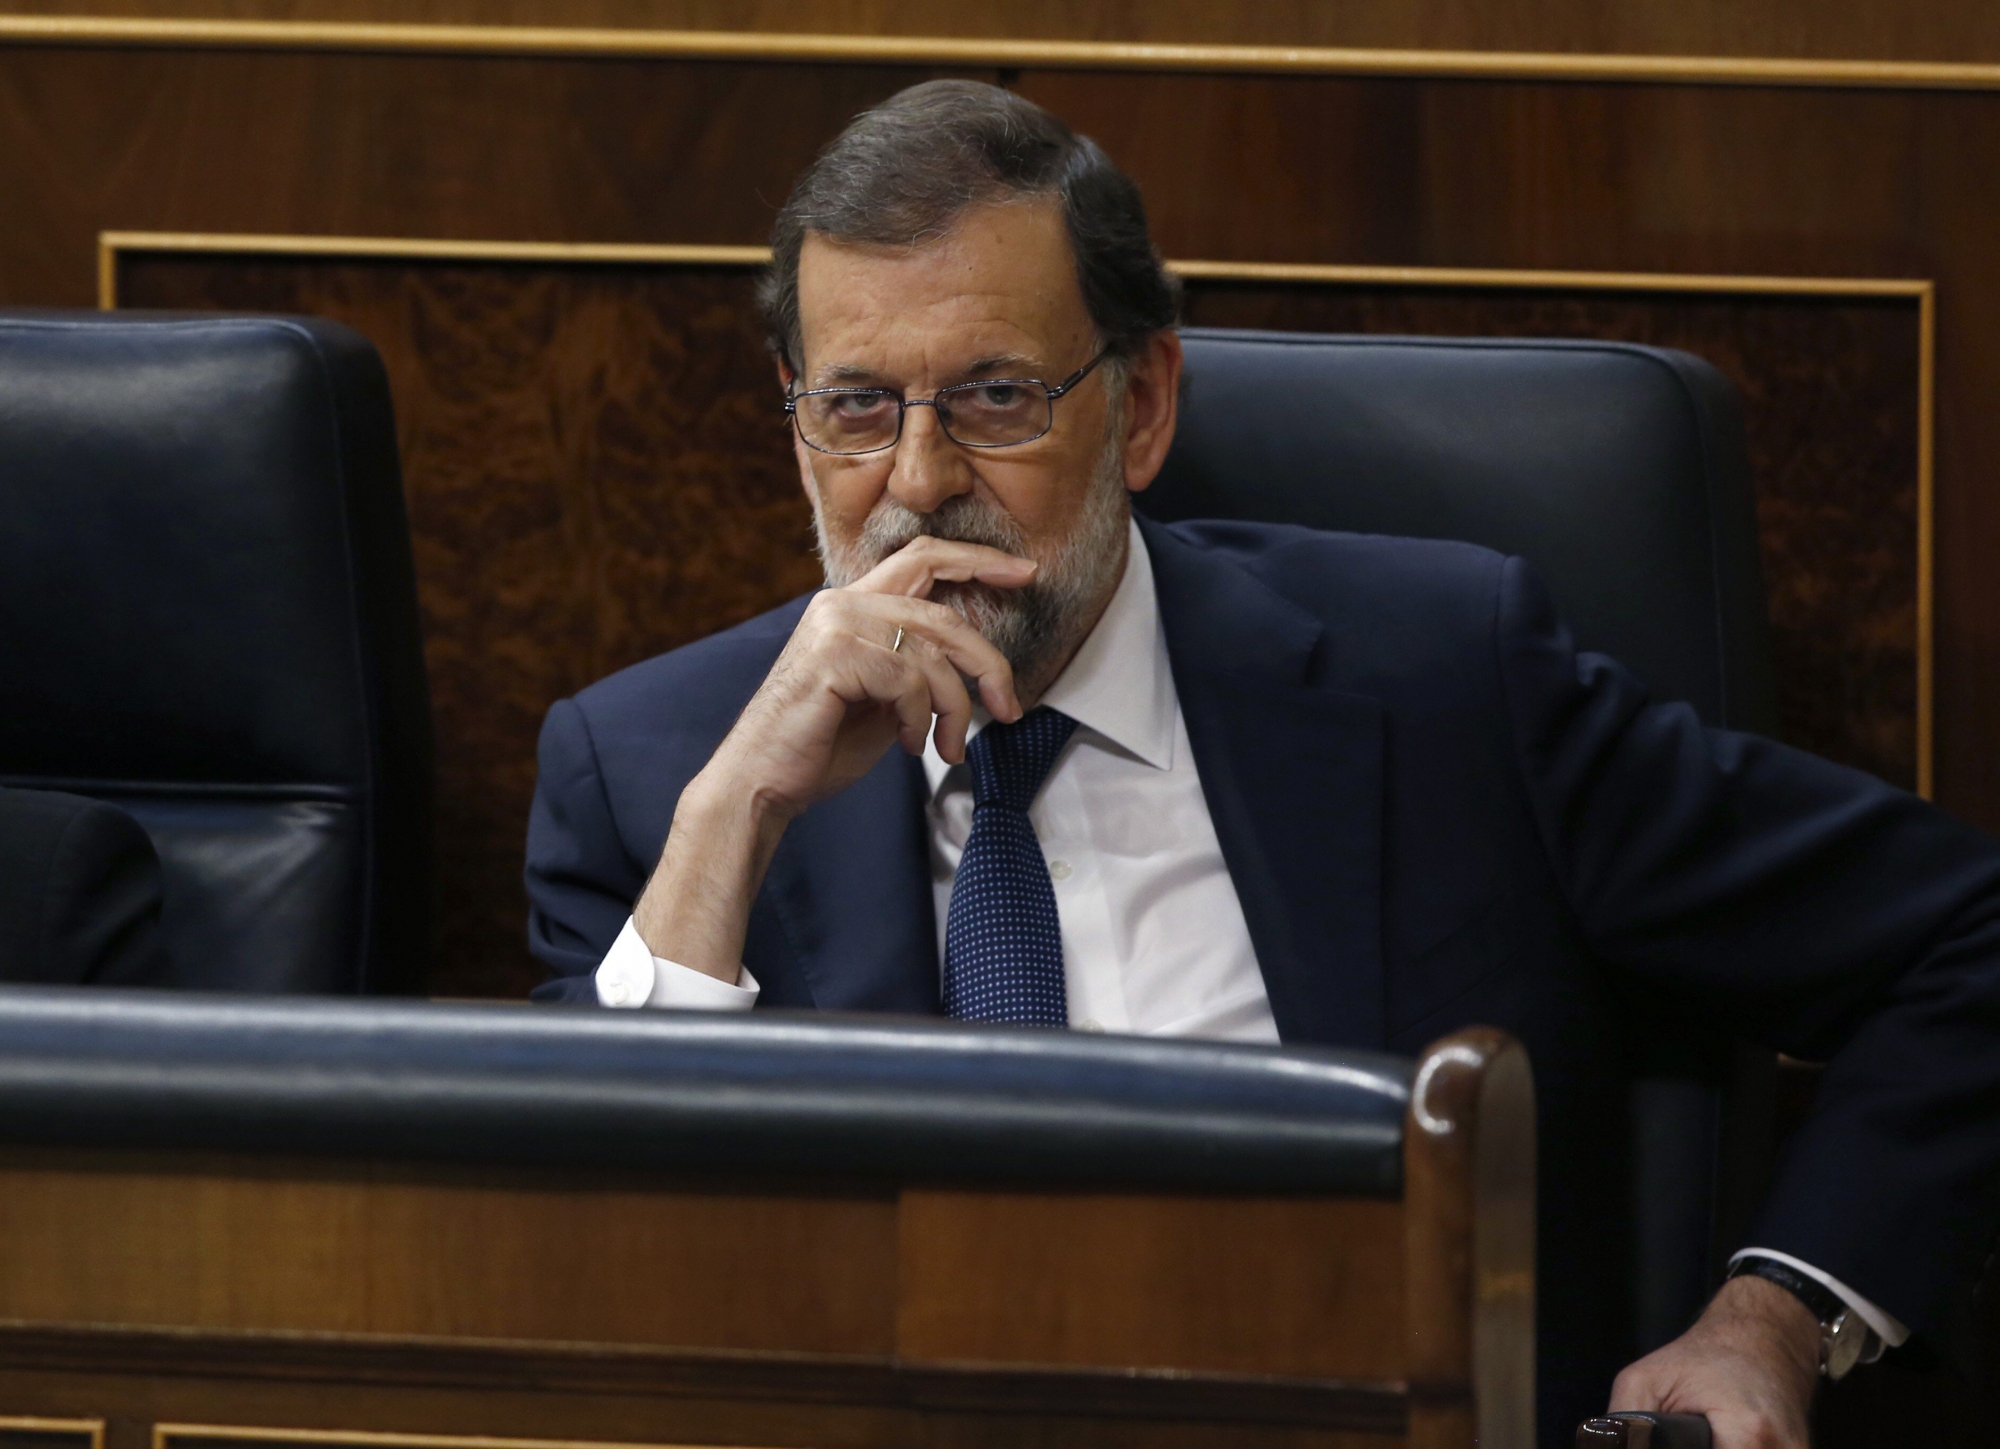 epa06259354 Spanish Prime Minister Mariano Rajoy during Question Time at the Lower House in Madrid, Spain, 11 October 2017. The Government will undergo Question Time a day after Catalonia's regional President Carles Puigdemont declared the region's independence but suspended its effects immediately for a few weeks to search a dialogue with the Spanish Central Government.  EPA/Javier Lizon SPAIN PARLIAMENT